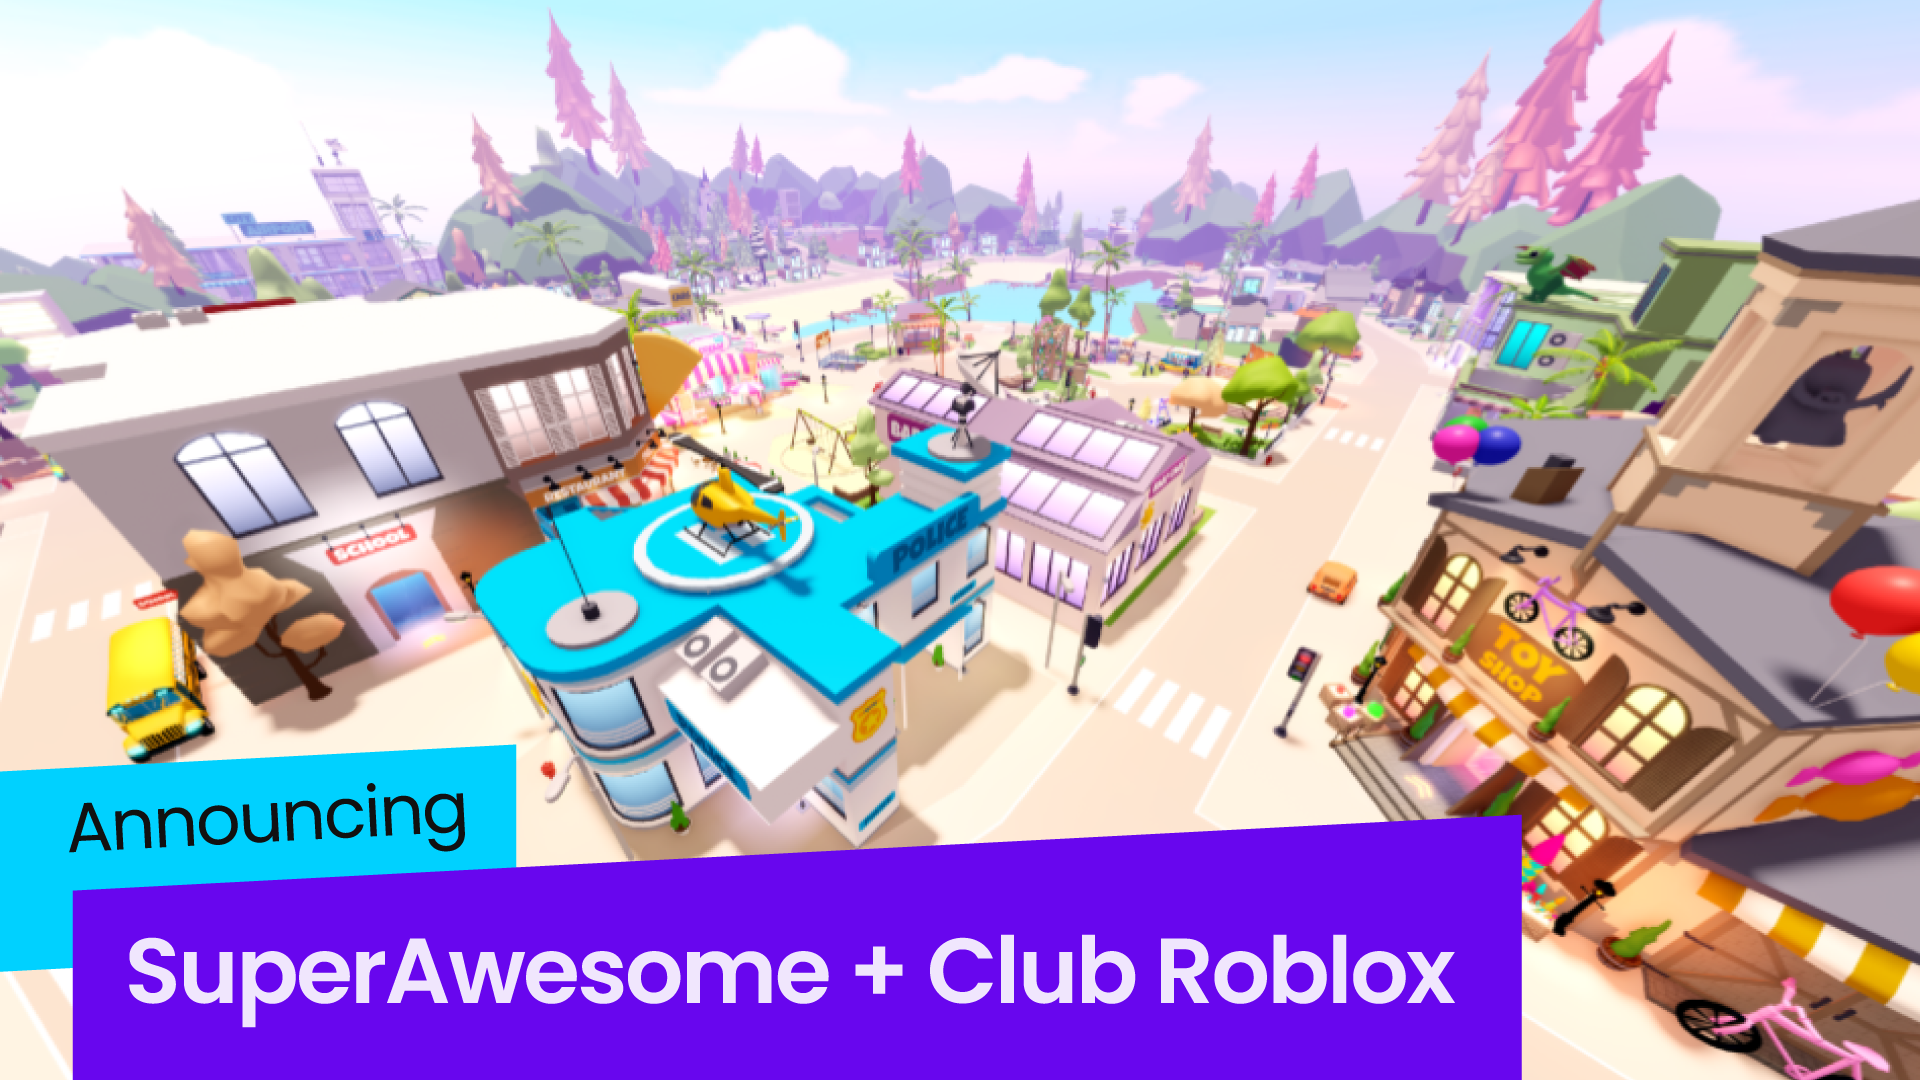 Is Roblox playable on any cloud gaming services?